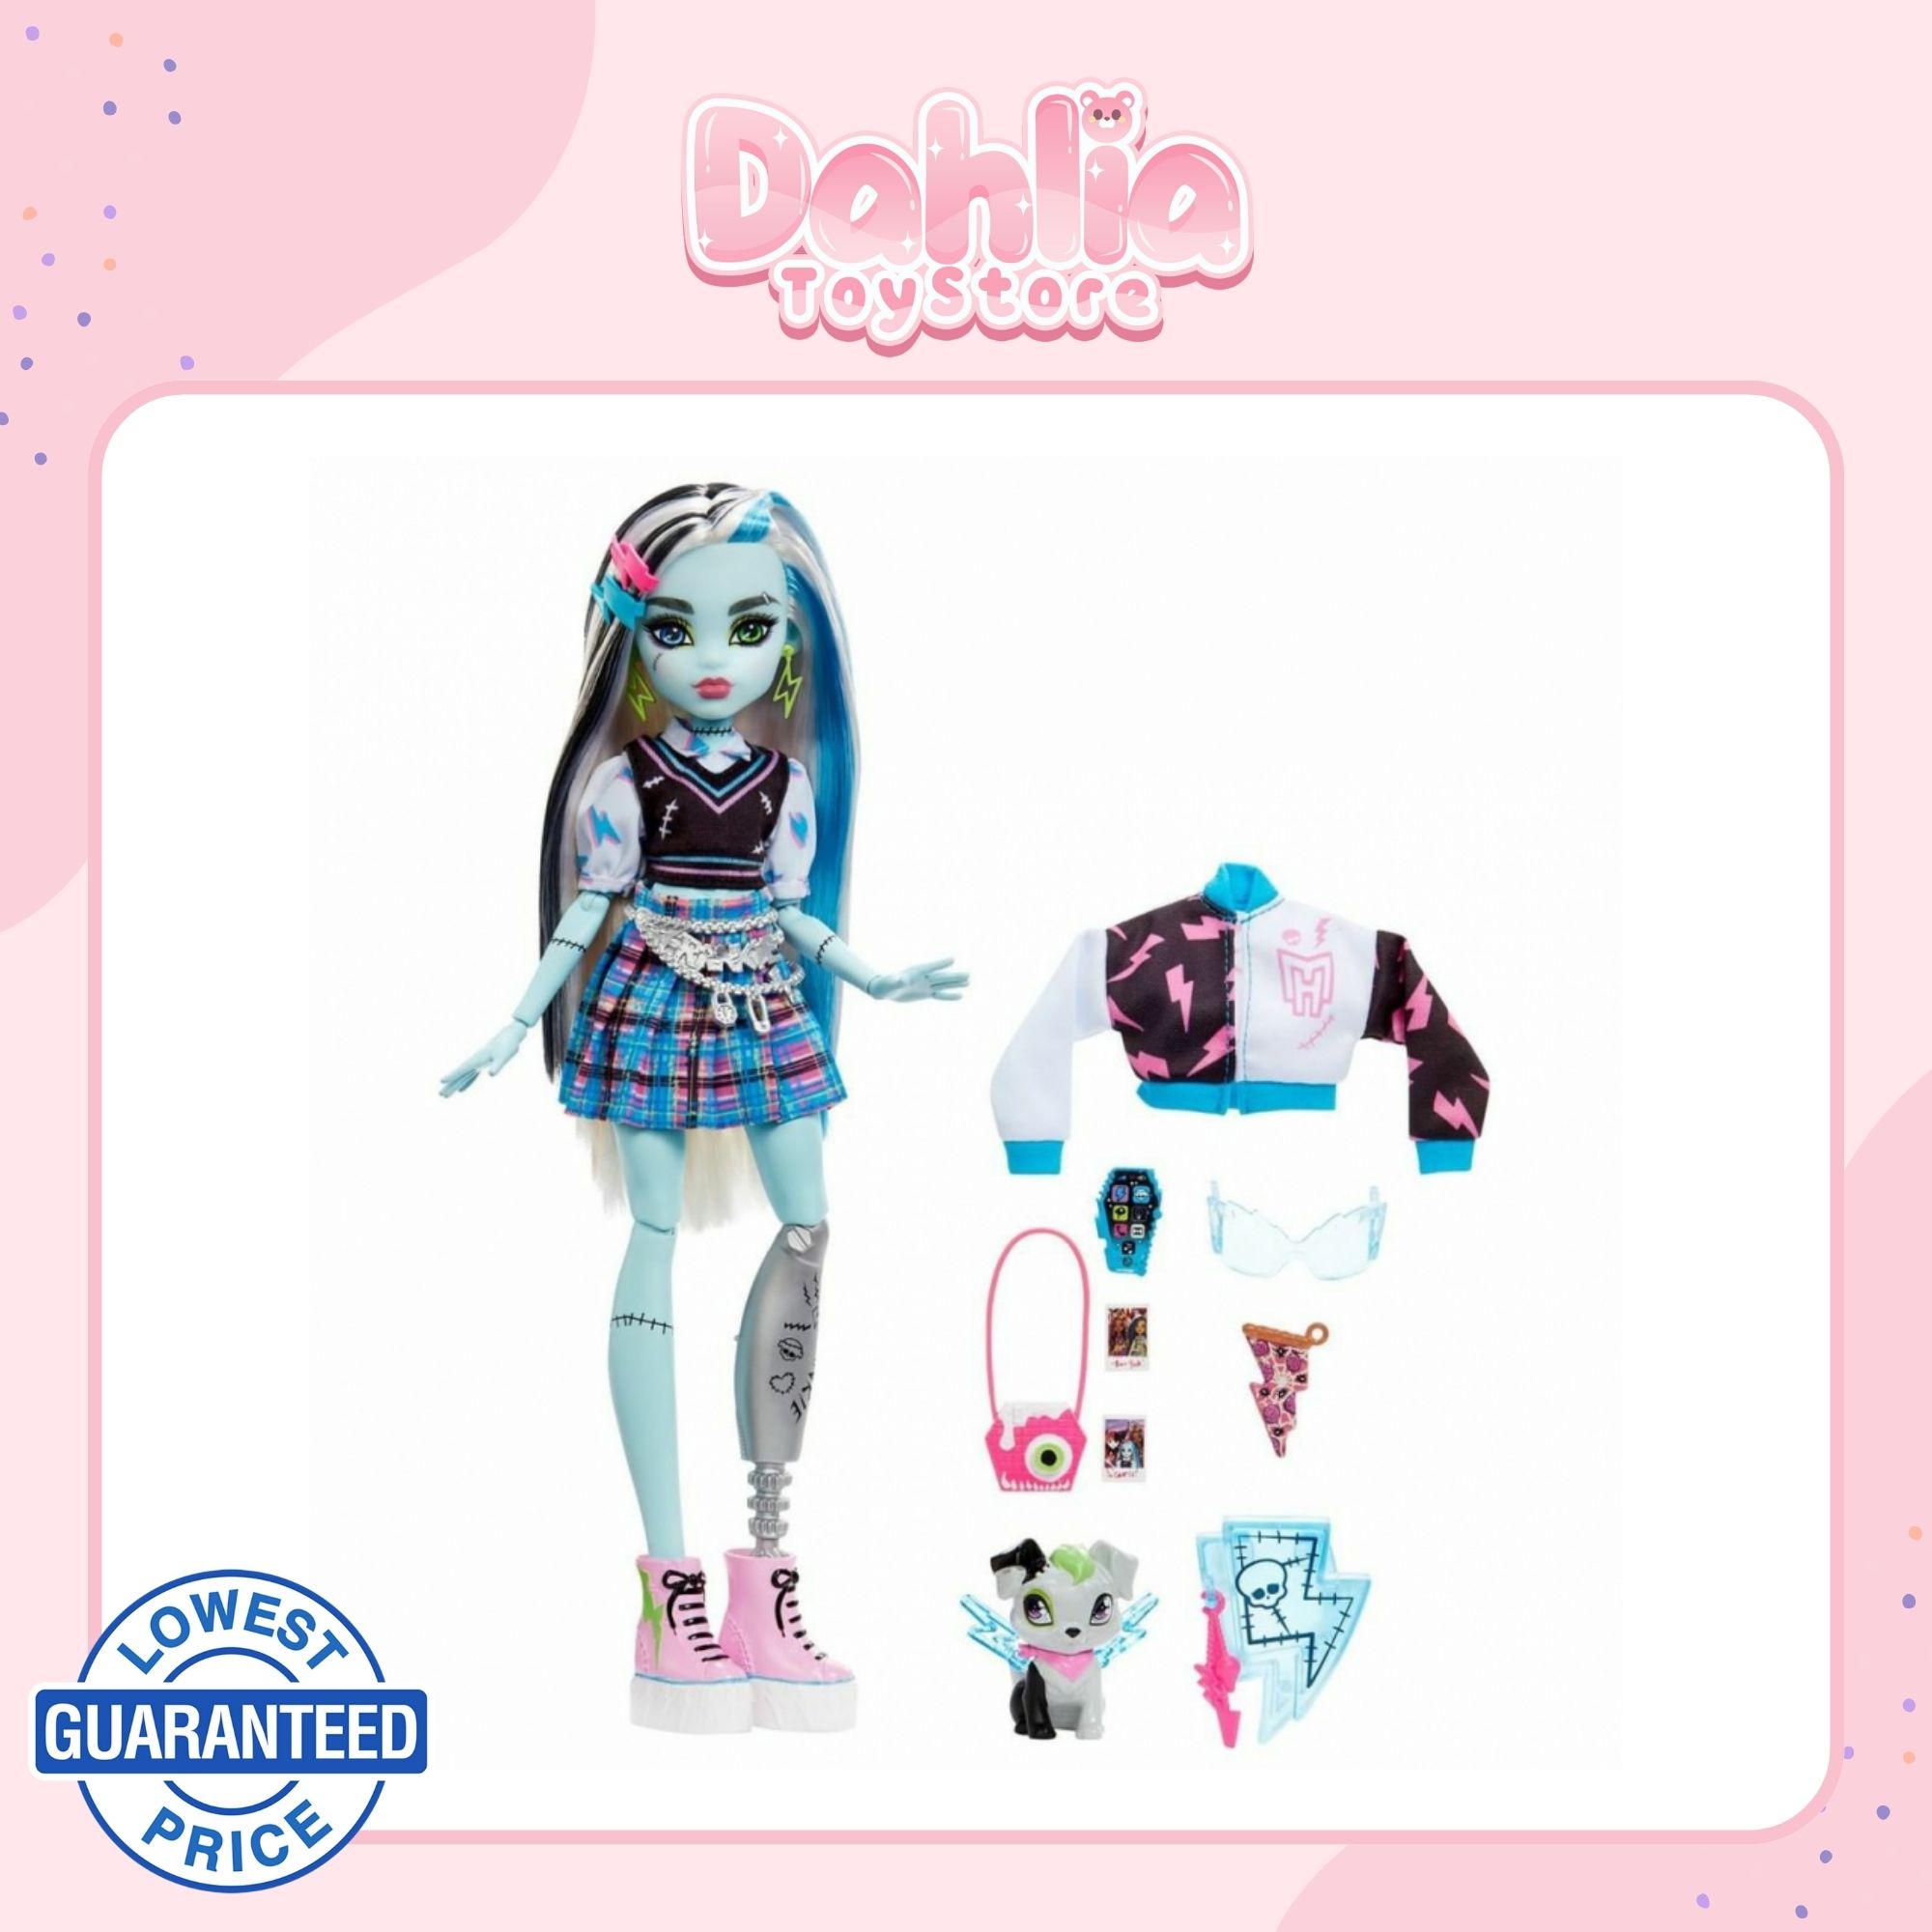 Monster High Frankie Stein Fashion Doll with Blue & Black Streaked Hair,  Signature Look, Accessories & Pet